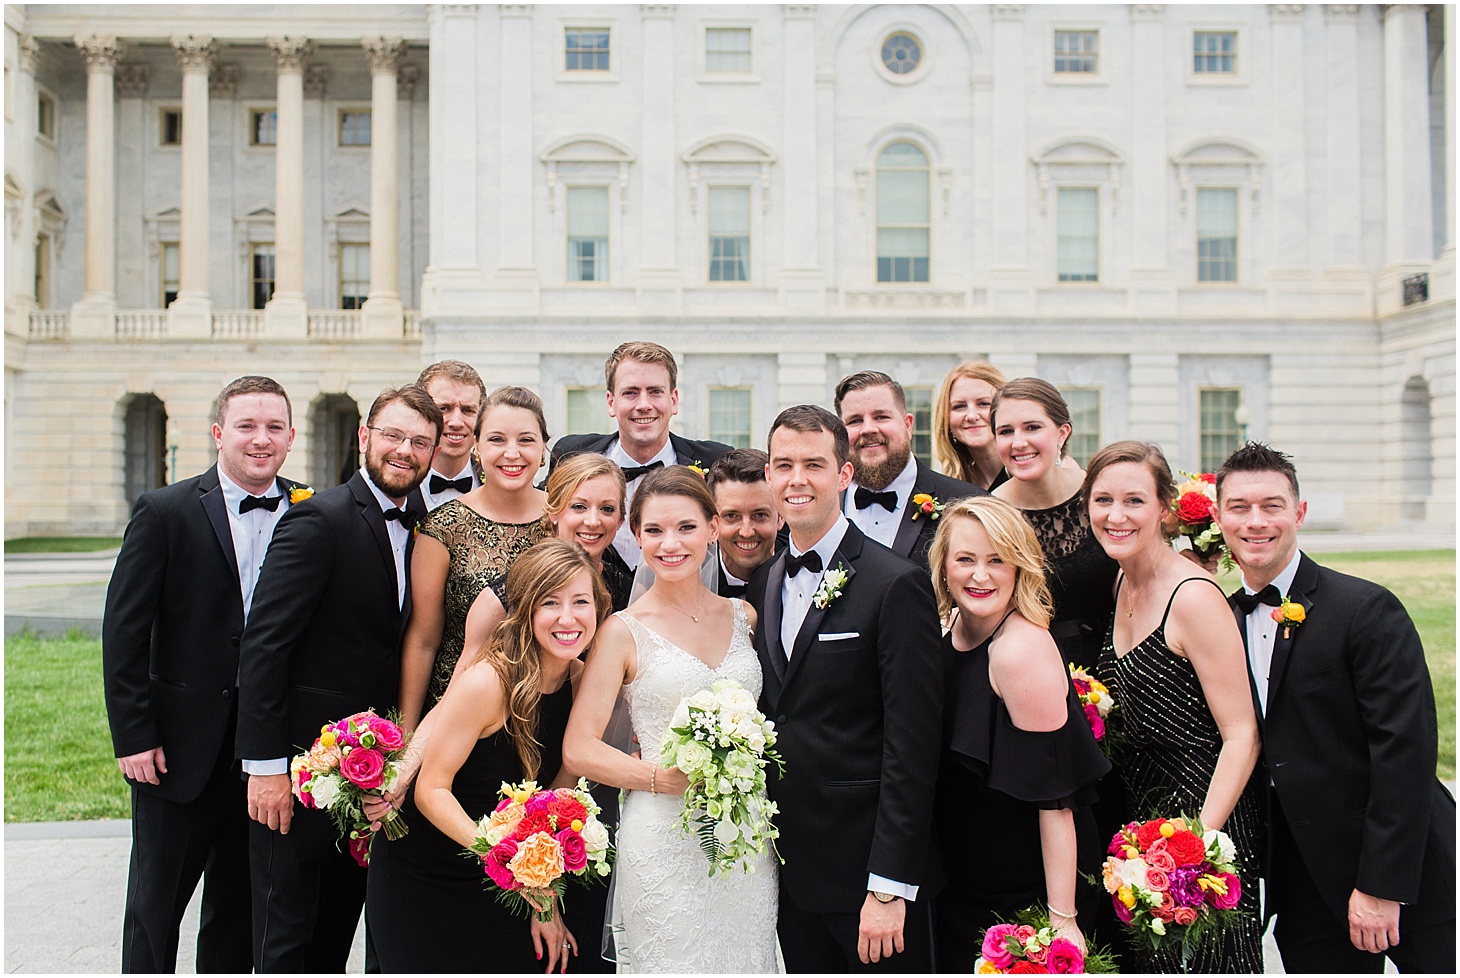 Wedding Party Portraits at Capitol, Black Tie Hay-Adams Wedding with Summer Florals, Ceremony at Capitol Hill Baptist Church, Sarah Bradshaw Photography, DC Wedding Photographer